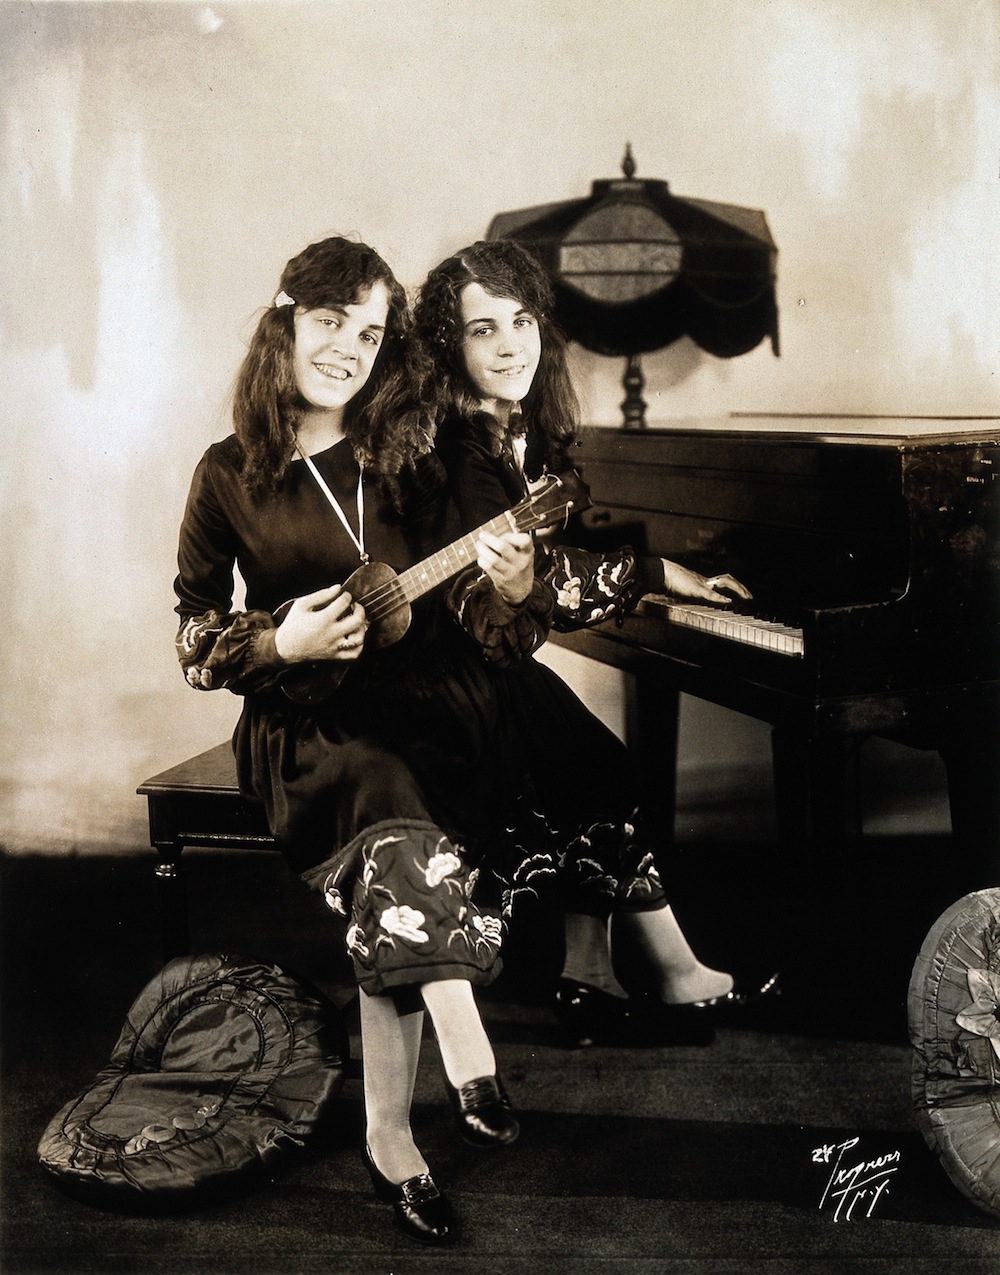 V0029601 Daisy and Violet Hilton, conjoined twins, playing piano and Credit: Wellcome Library, London. Wellcome Images images@wellcome.ac.uk http://wellcomeimages.org Daisy and Violet Hilton, conjoined twins, playing piano and ukelele. Photograph, c. 1927. 1930 Published:  -  Copyrighted work available under Creative Commons Attribution only licence CC BY 4.0 http://creativecommons.org/licenses/by/4.0/